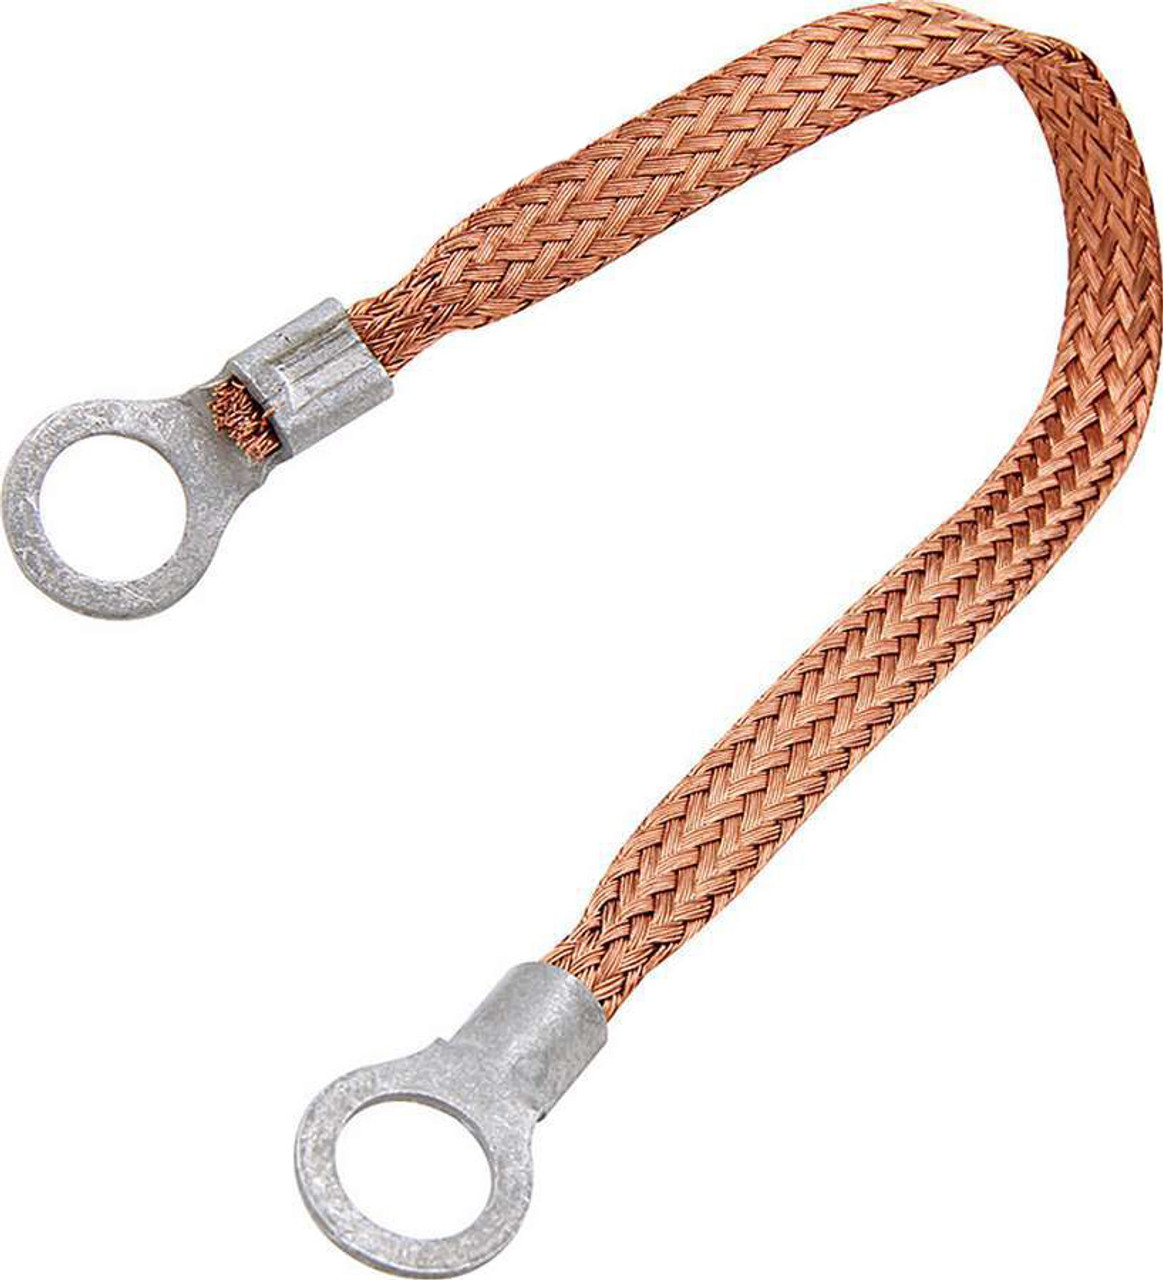 Copper Ground Strap 6in w/ 1/4in Ring Terminals